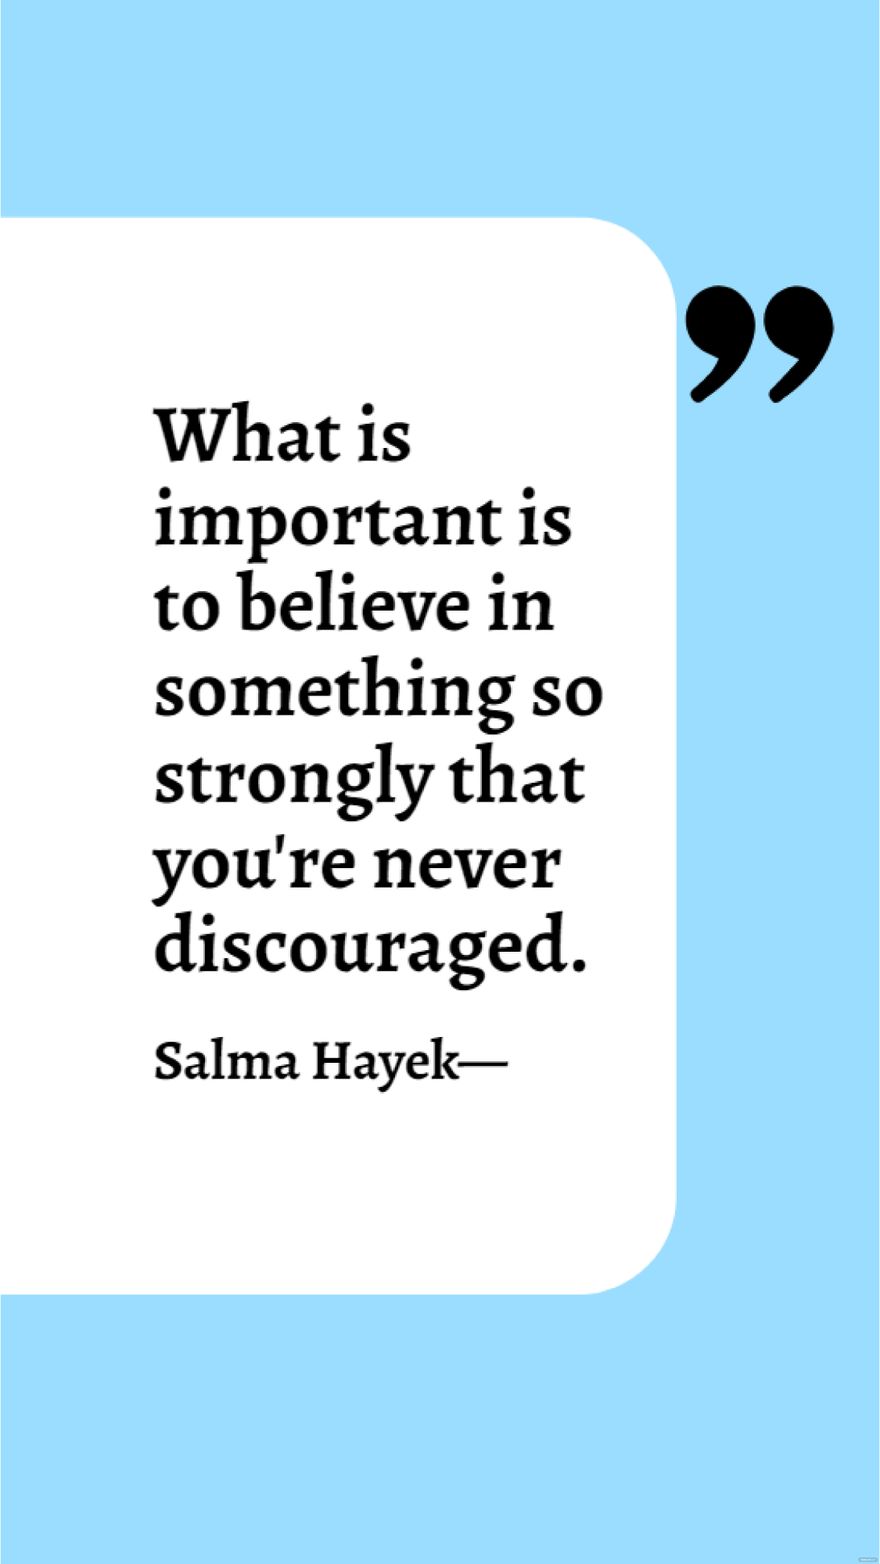 Salma Hayek - What is important is to believe in something so strongly that you're never discouraged.